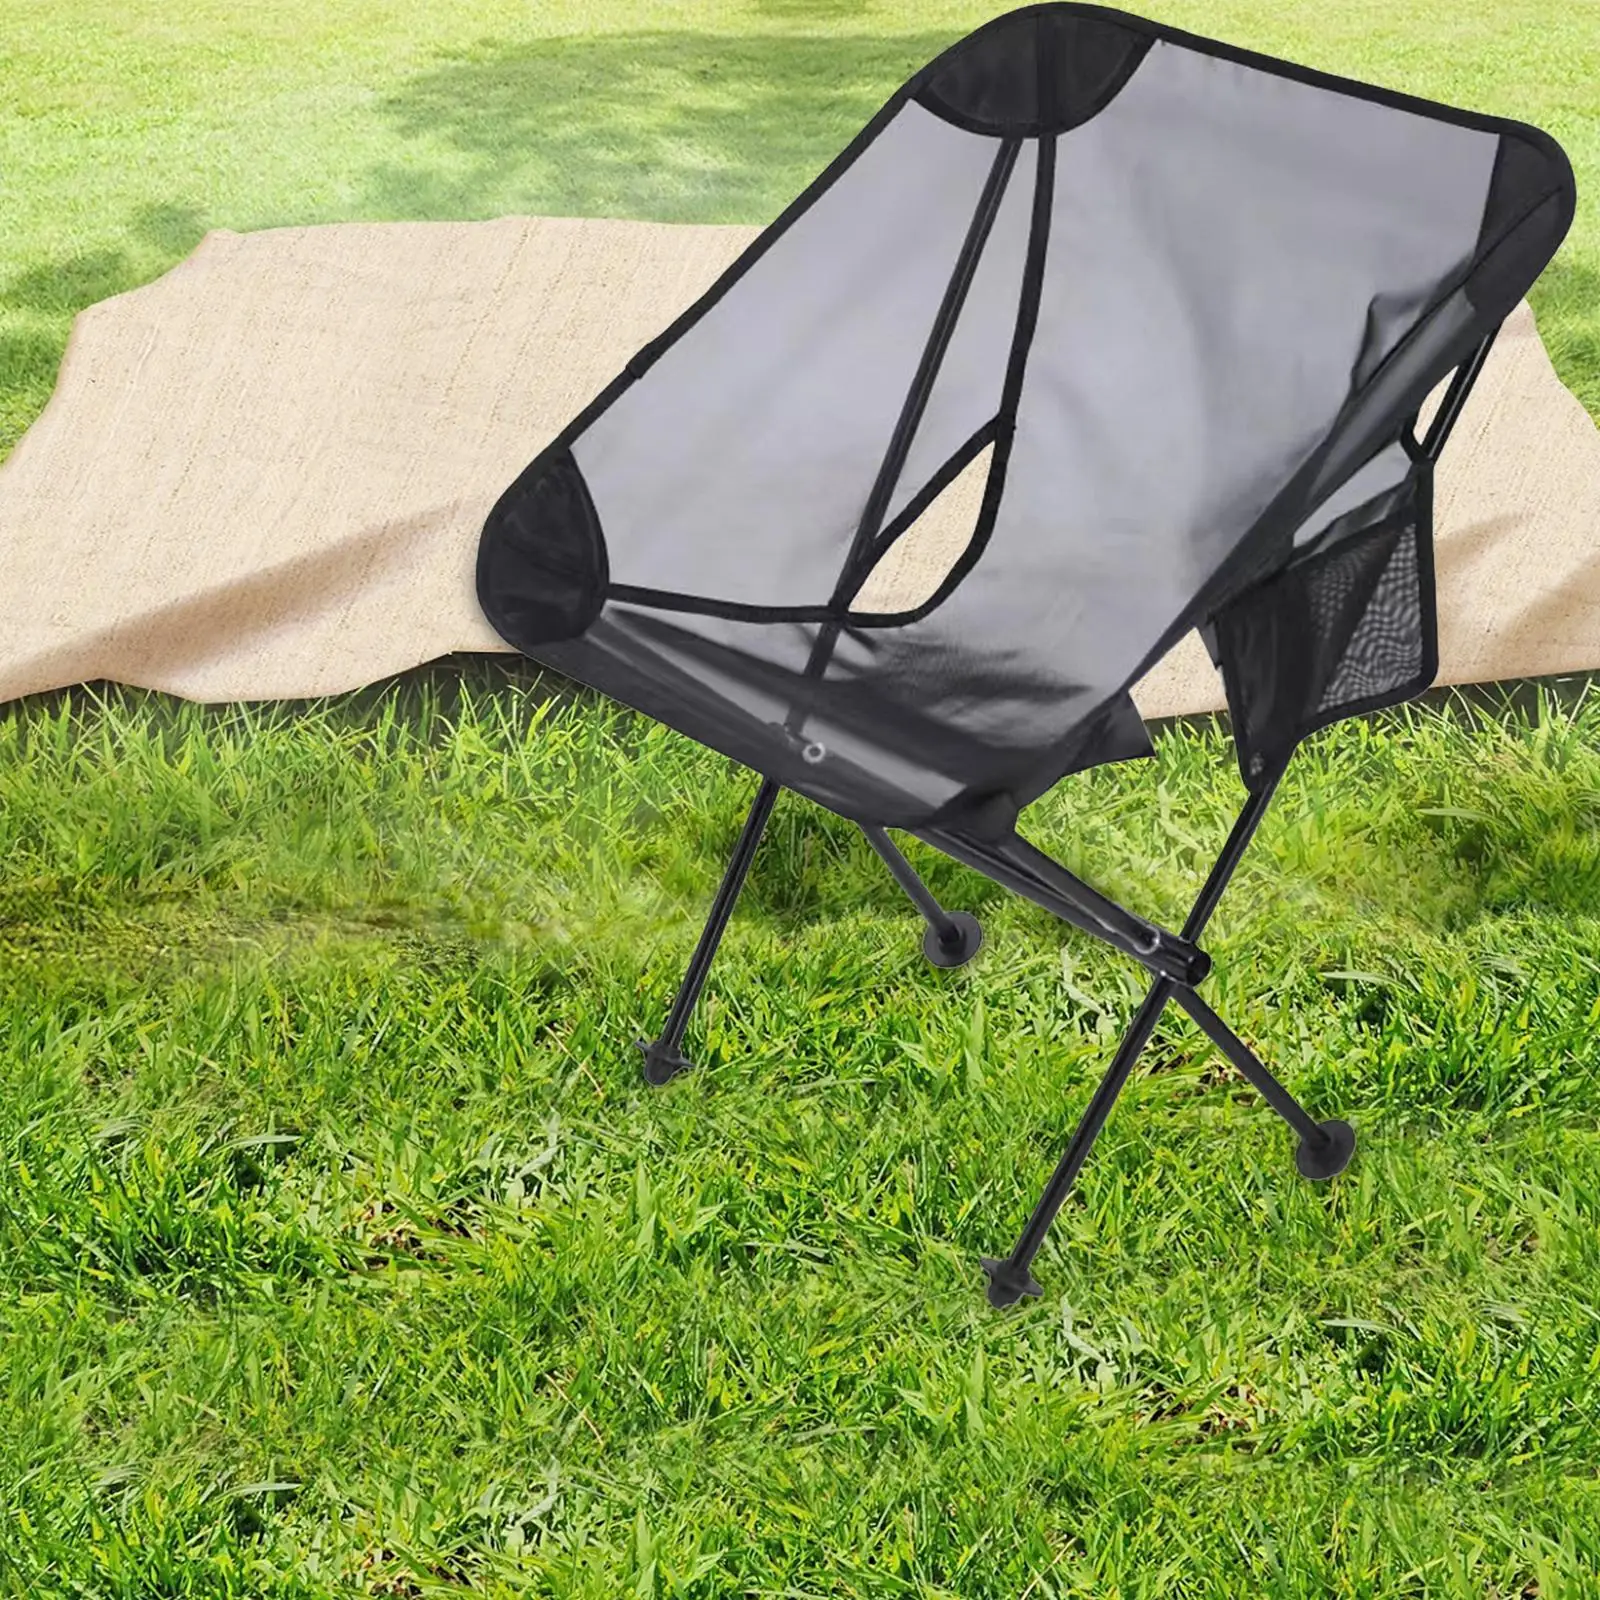 Folding Camping Chair Outdoor Moon Chair for Outdoor Gardens Fishing Backpacking Campings Accessory Beach Chair Folding Chair